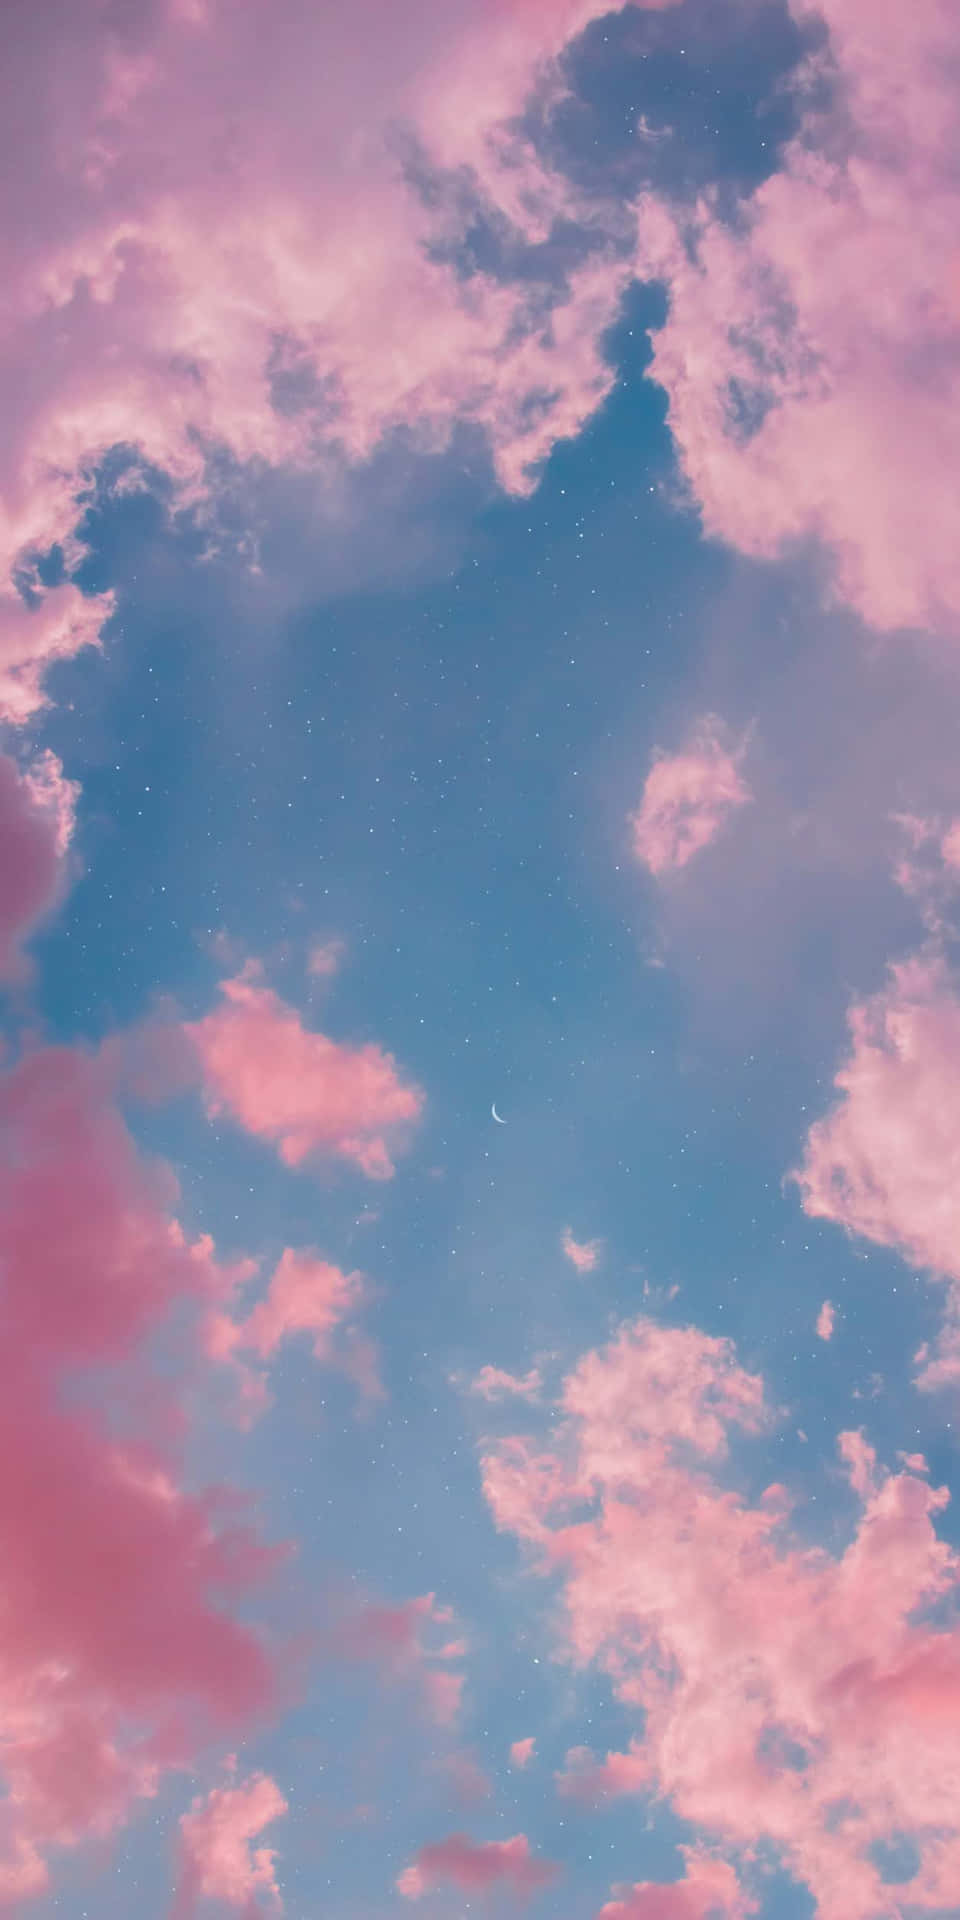 A Pink Sky With Clouds And A Moon